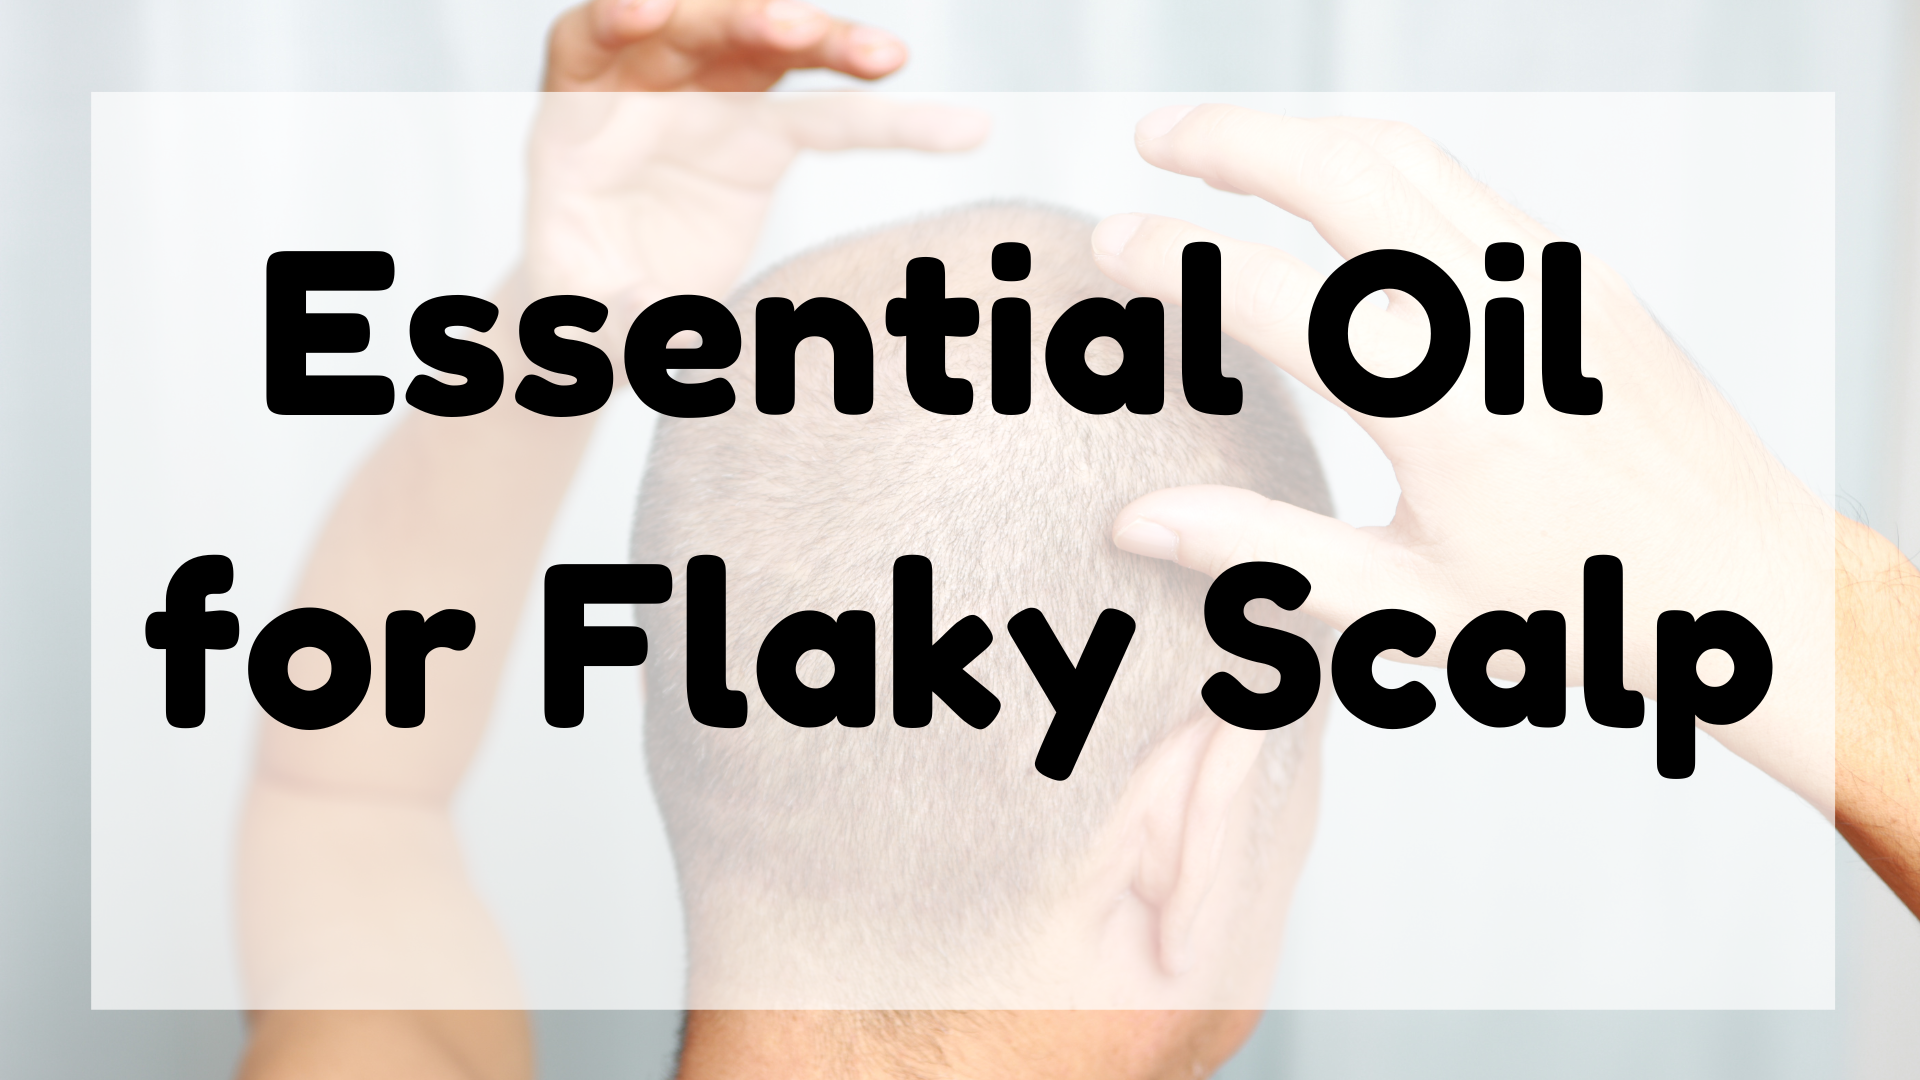 Essential Oil for Flaky Scalp featured image